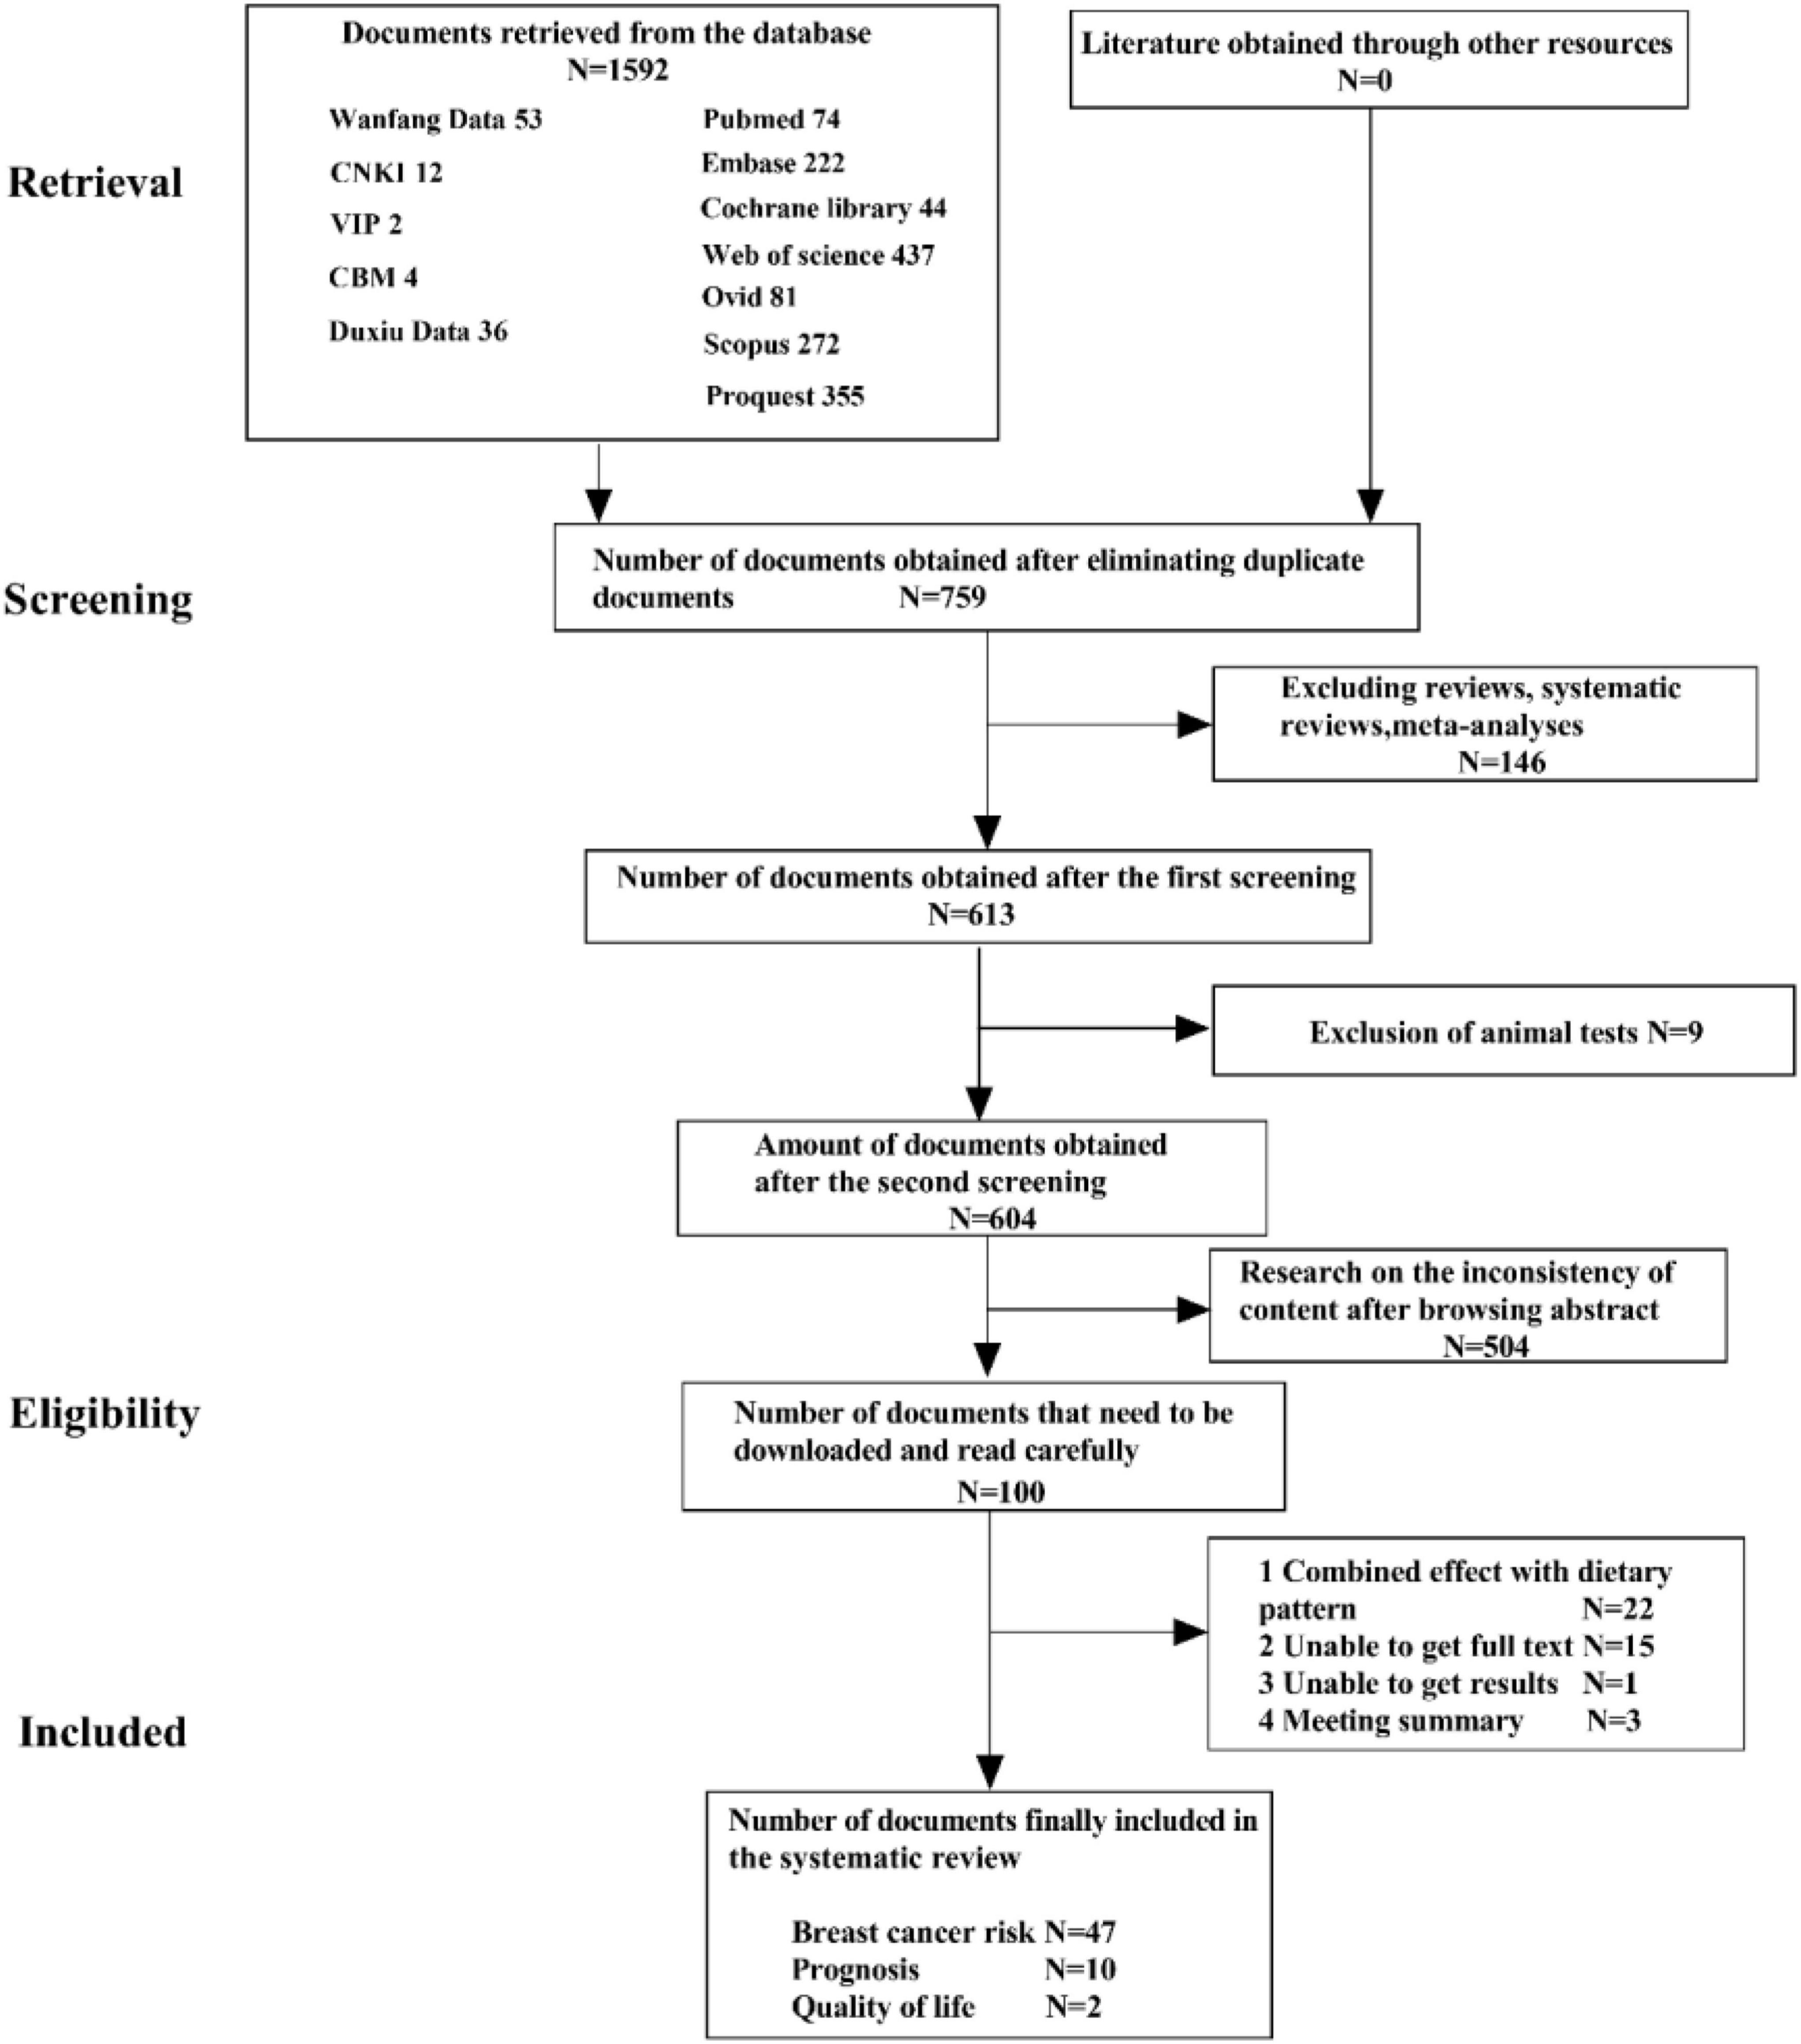 Dietary patterns and breast cancer risk, prognosis, and quality of life: A systematic review